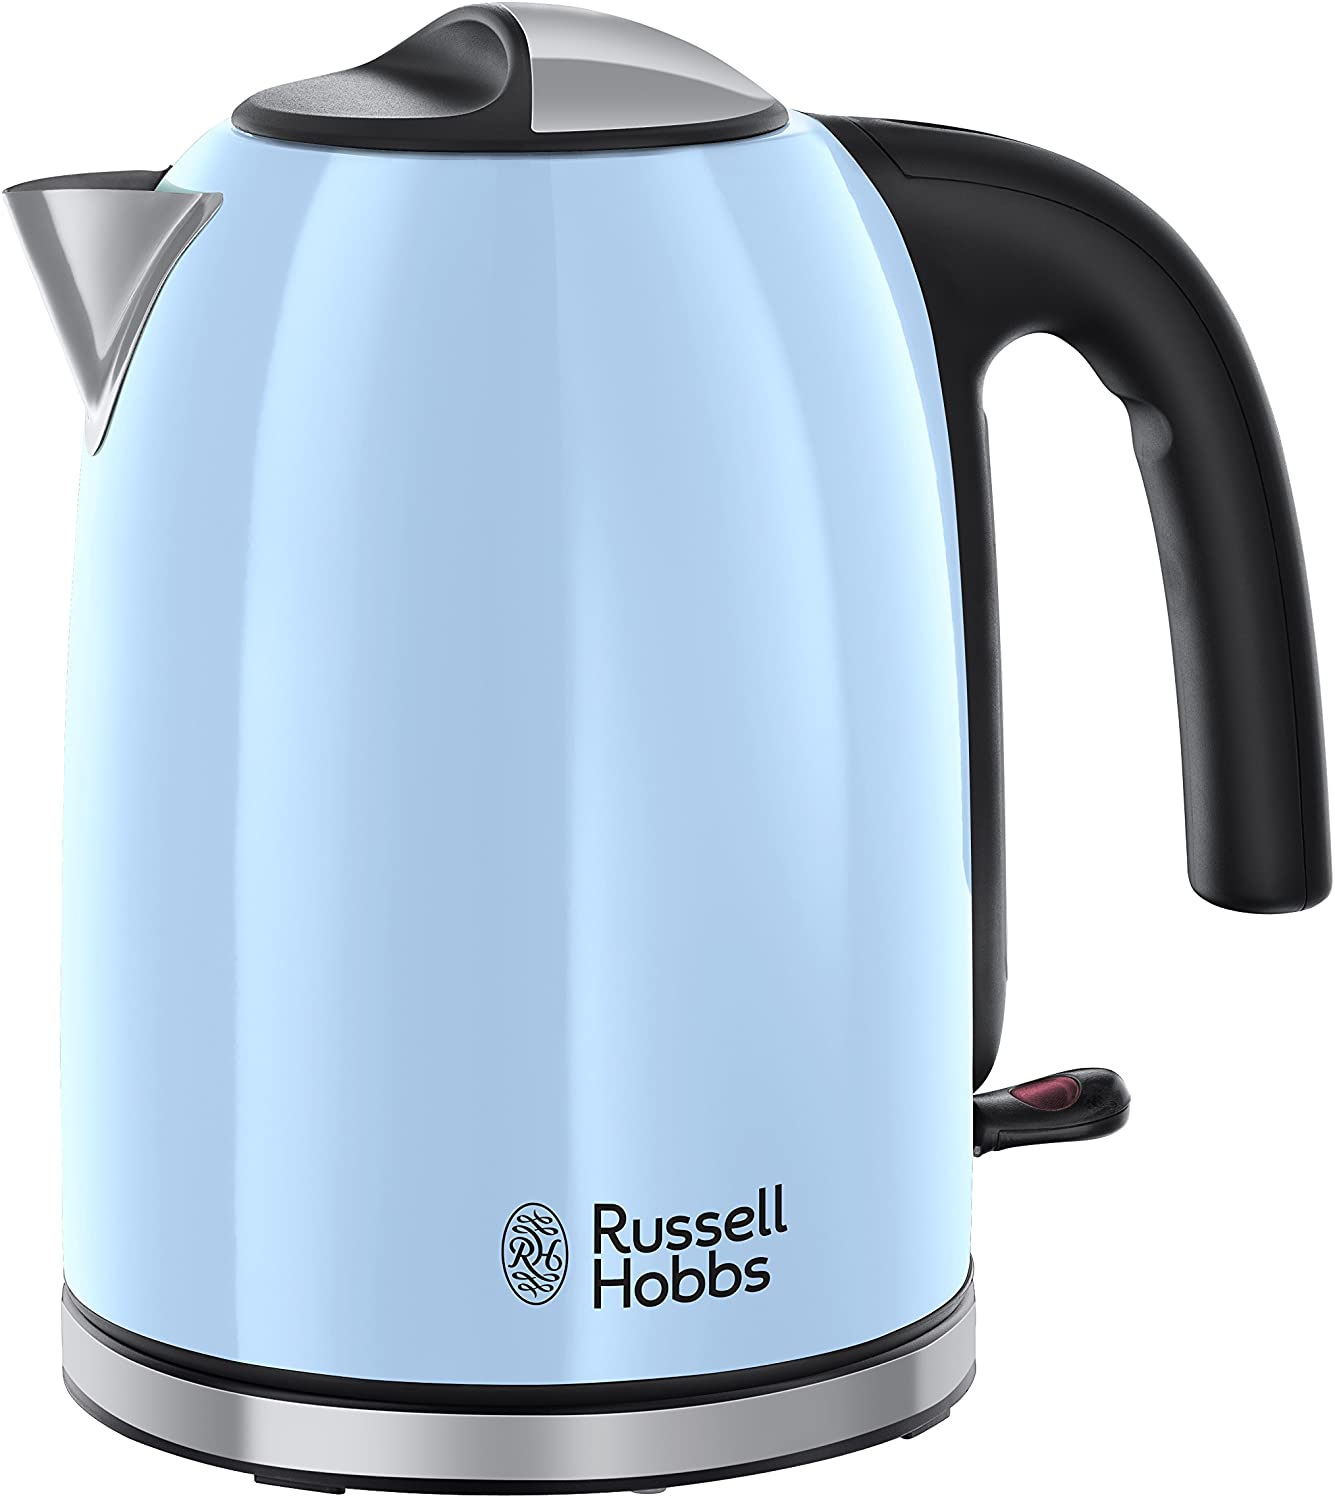 Russell Hobbs 20417 70 Colours Plus with Concealed Rapid Boil Jug Kettle, 1.7 Litre, 2400 Watt, Blue